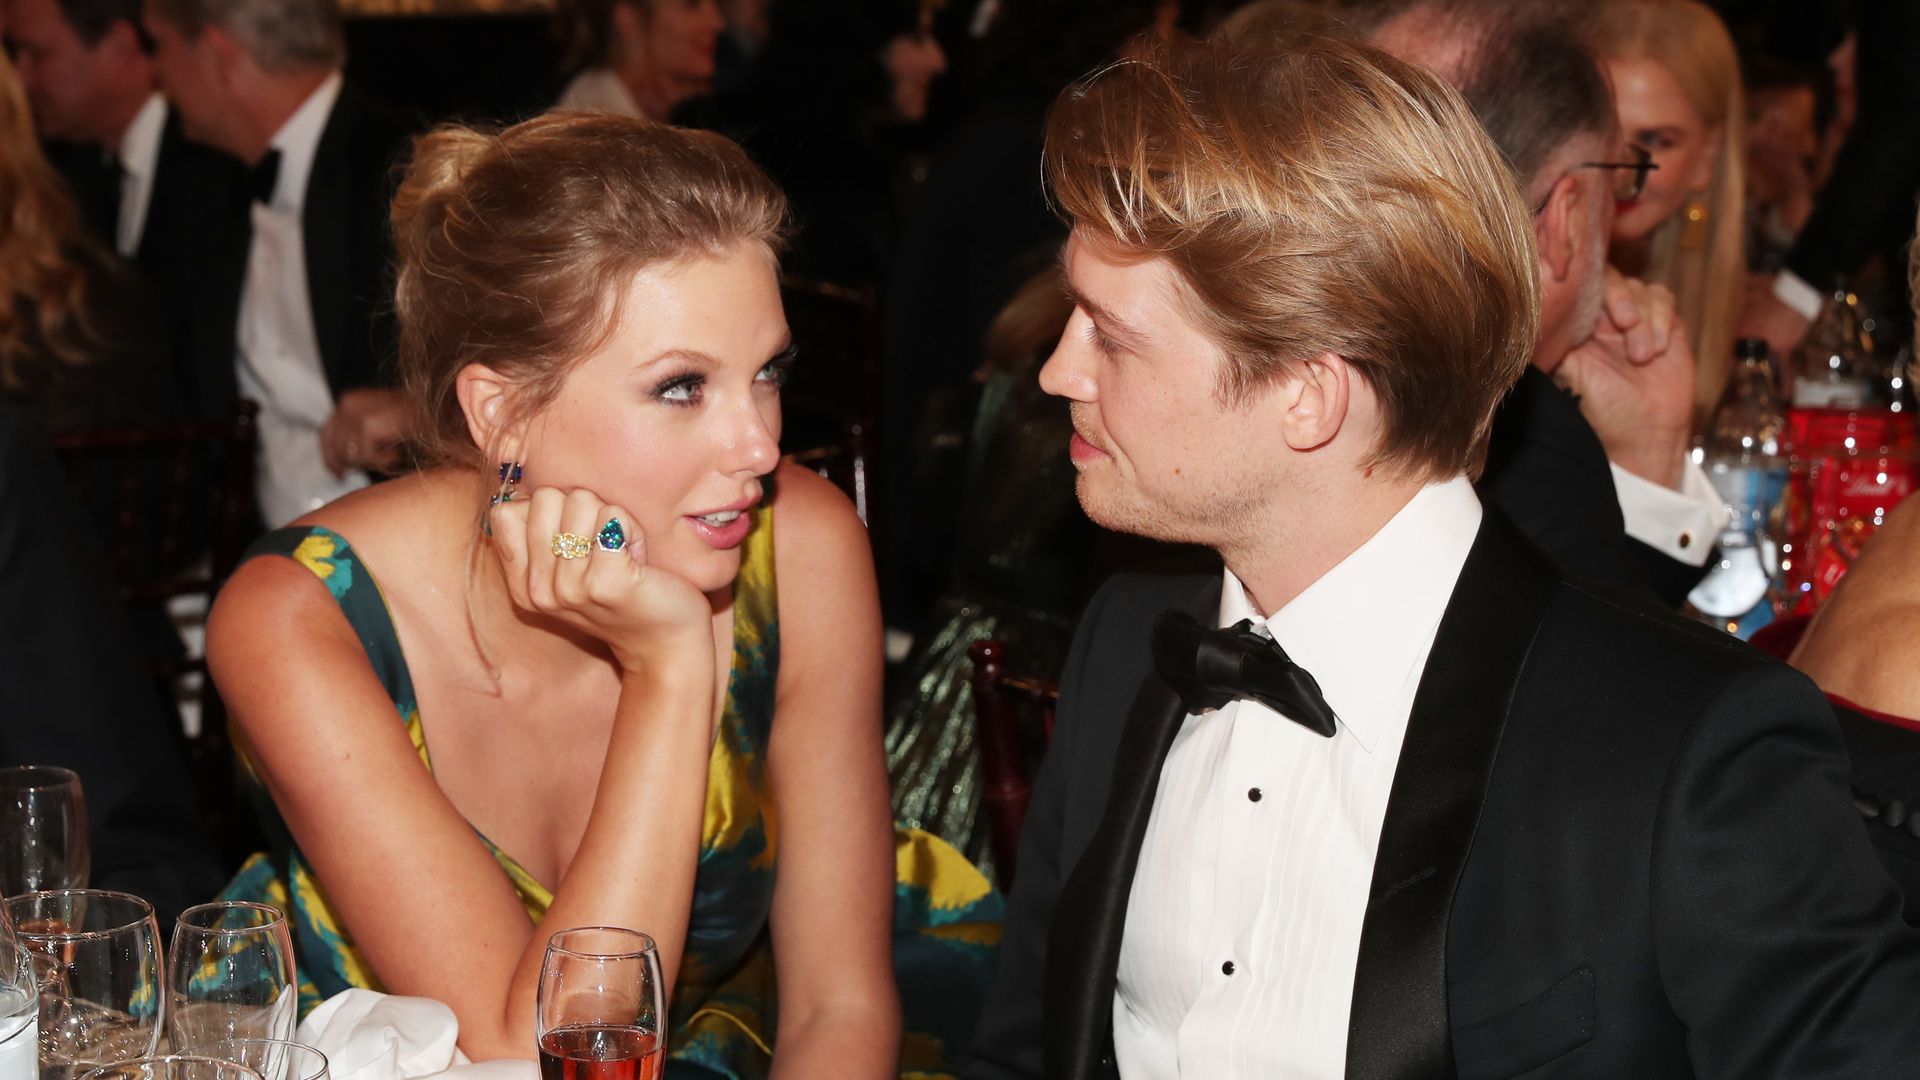 Taylor and Joe at an awards ceremony sat talking and looking at each other lovingly